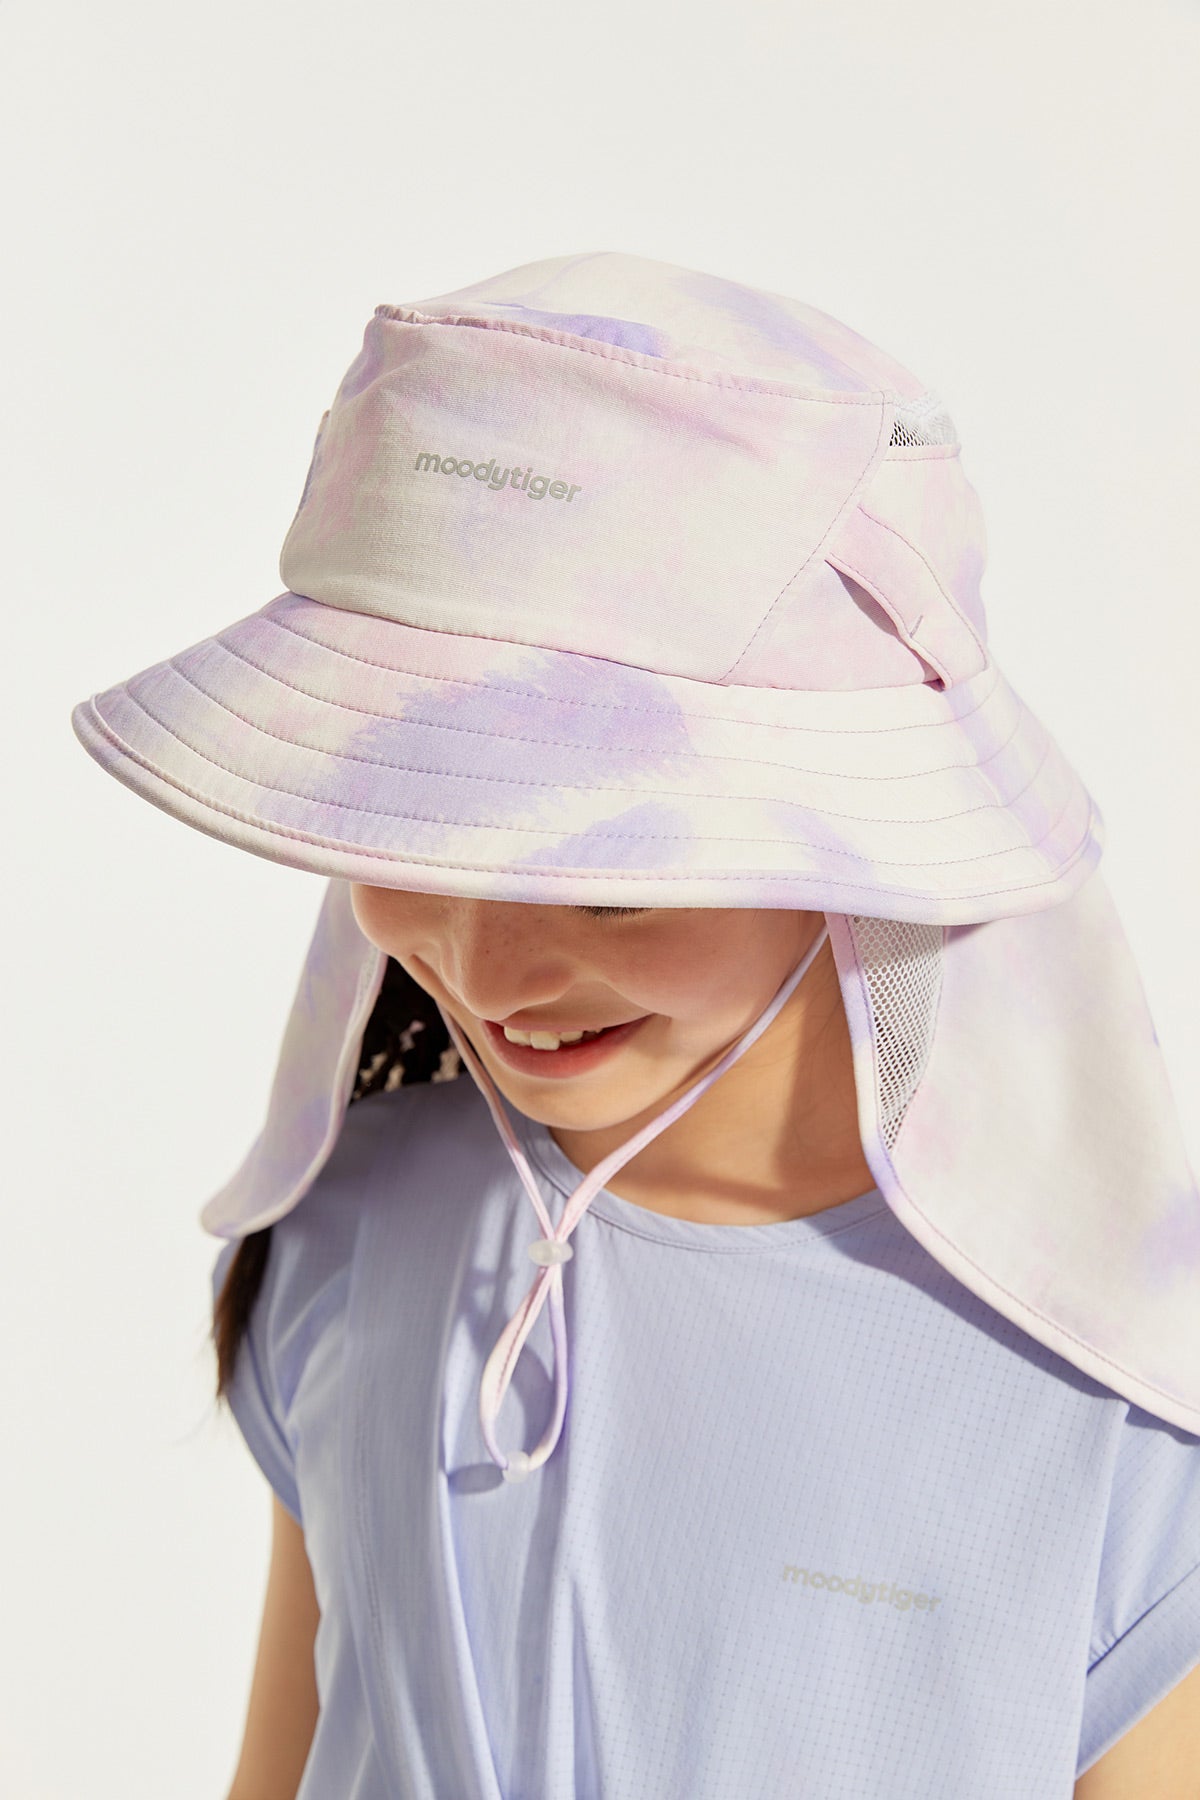 All Covered Sun Protective Hat